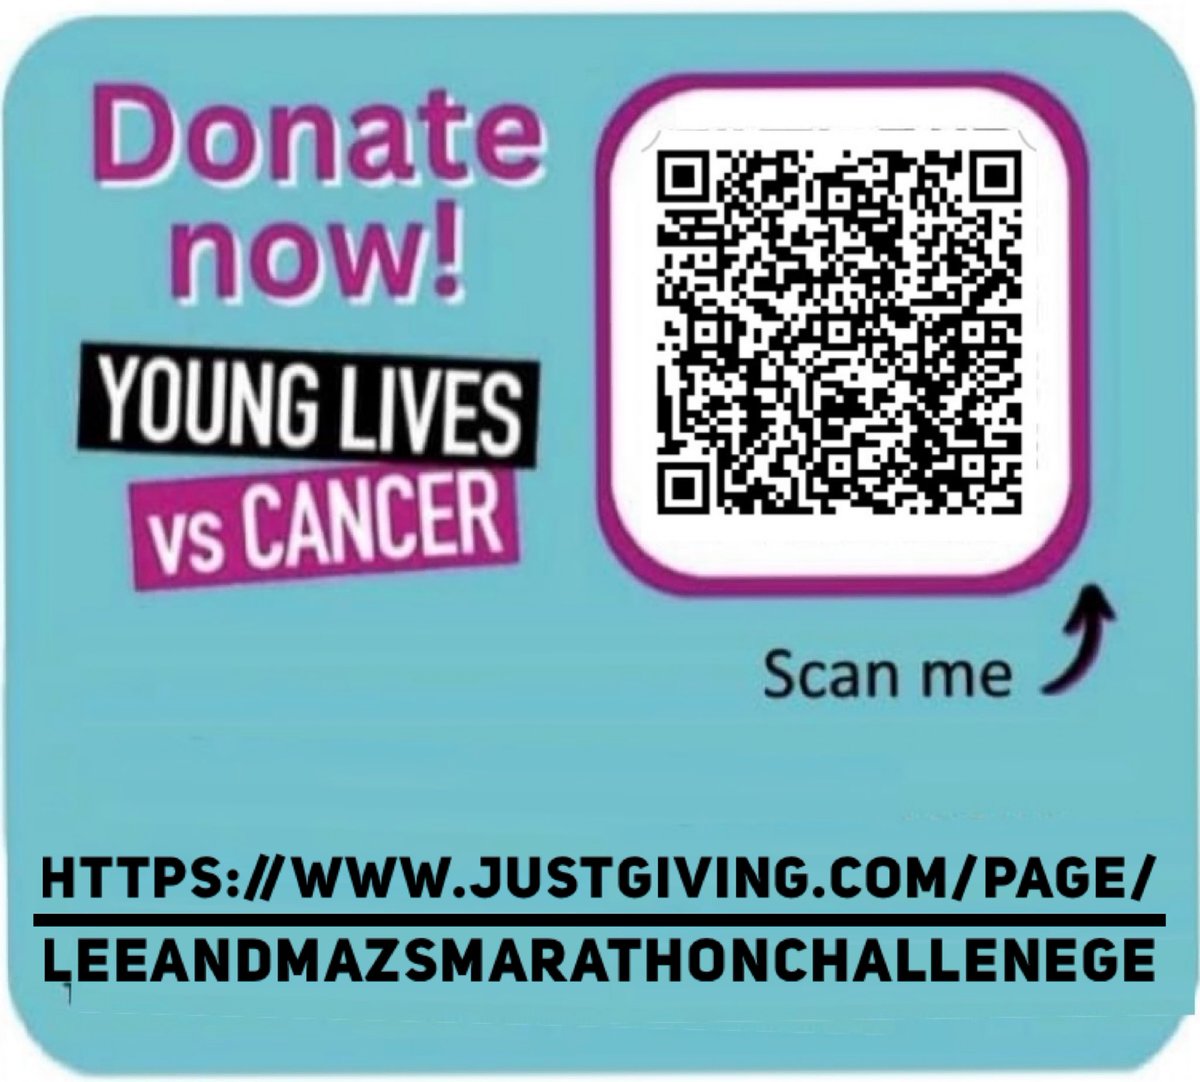 It’s the @LondonMarathon in just 2 weeks and myself and @mmmmazzy are trying to raise as much as we can for @YLvsCancer … please help by donating on the link below 🤷‍♂️ #londonmarathon